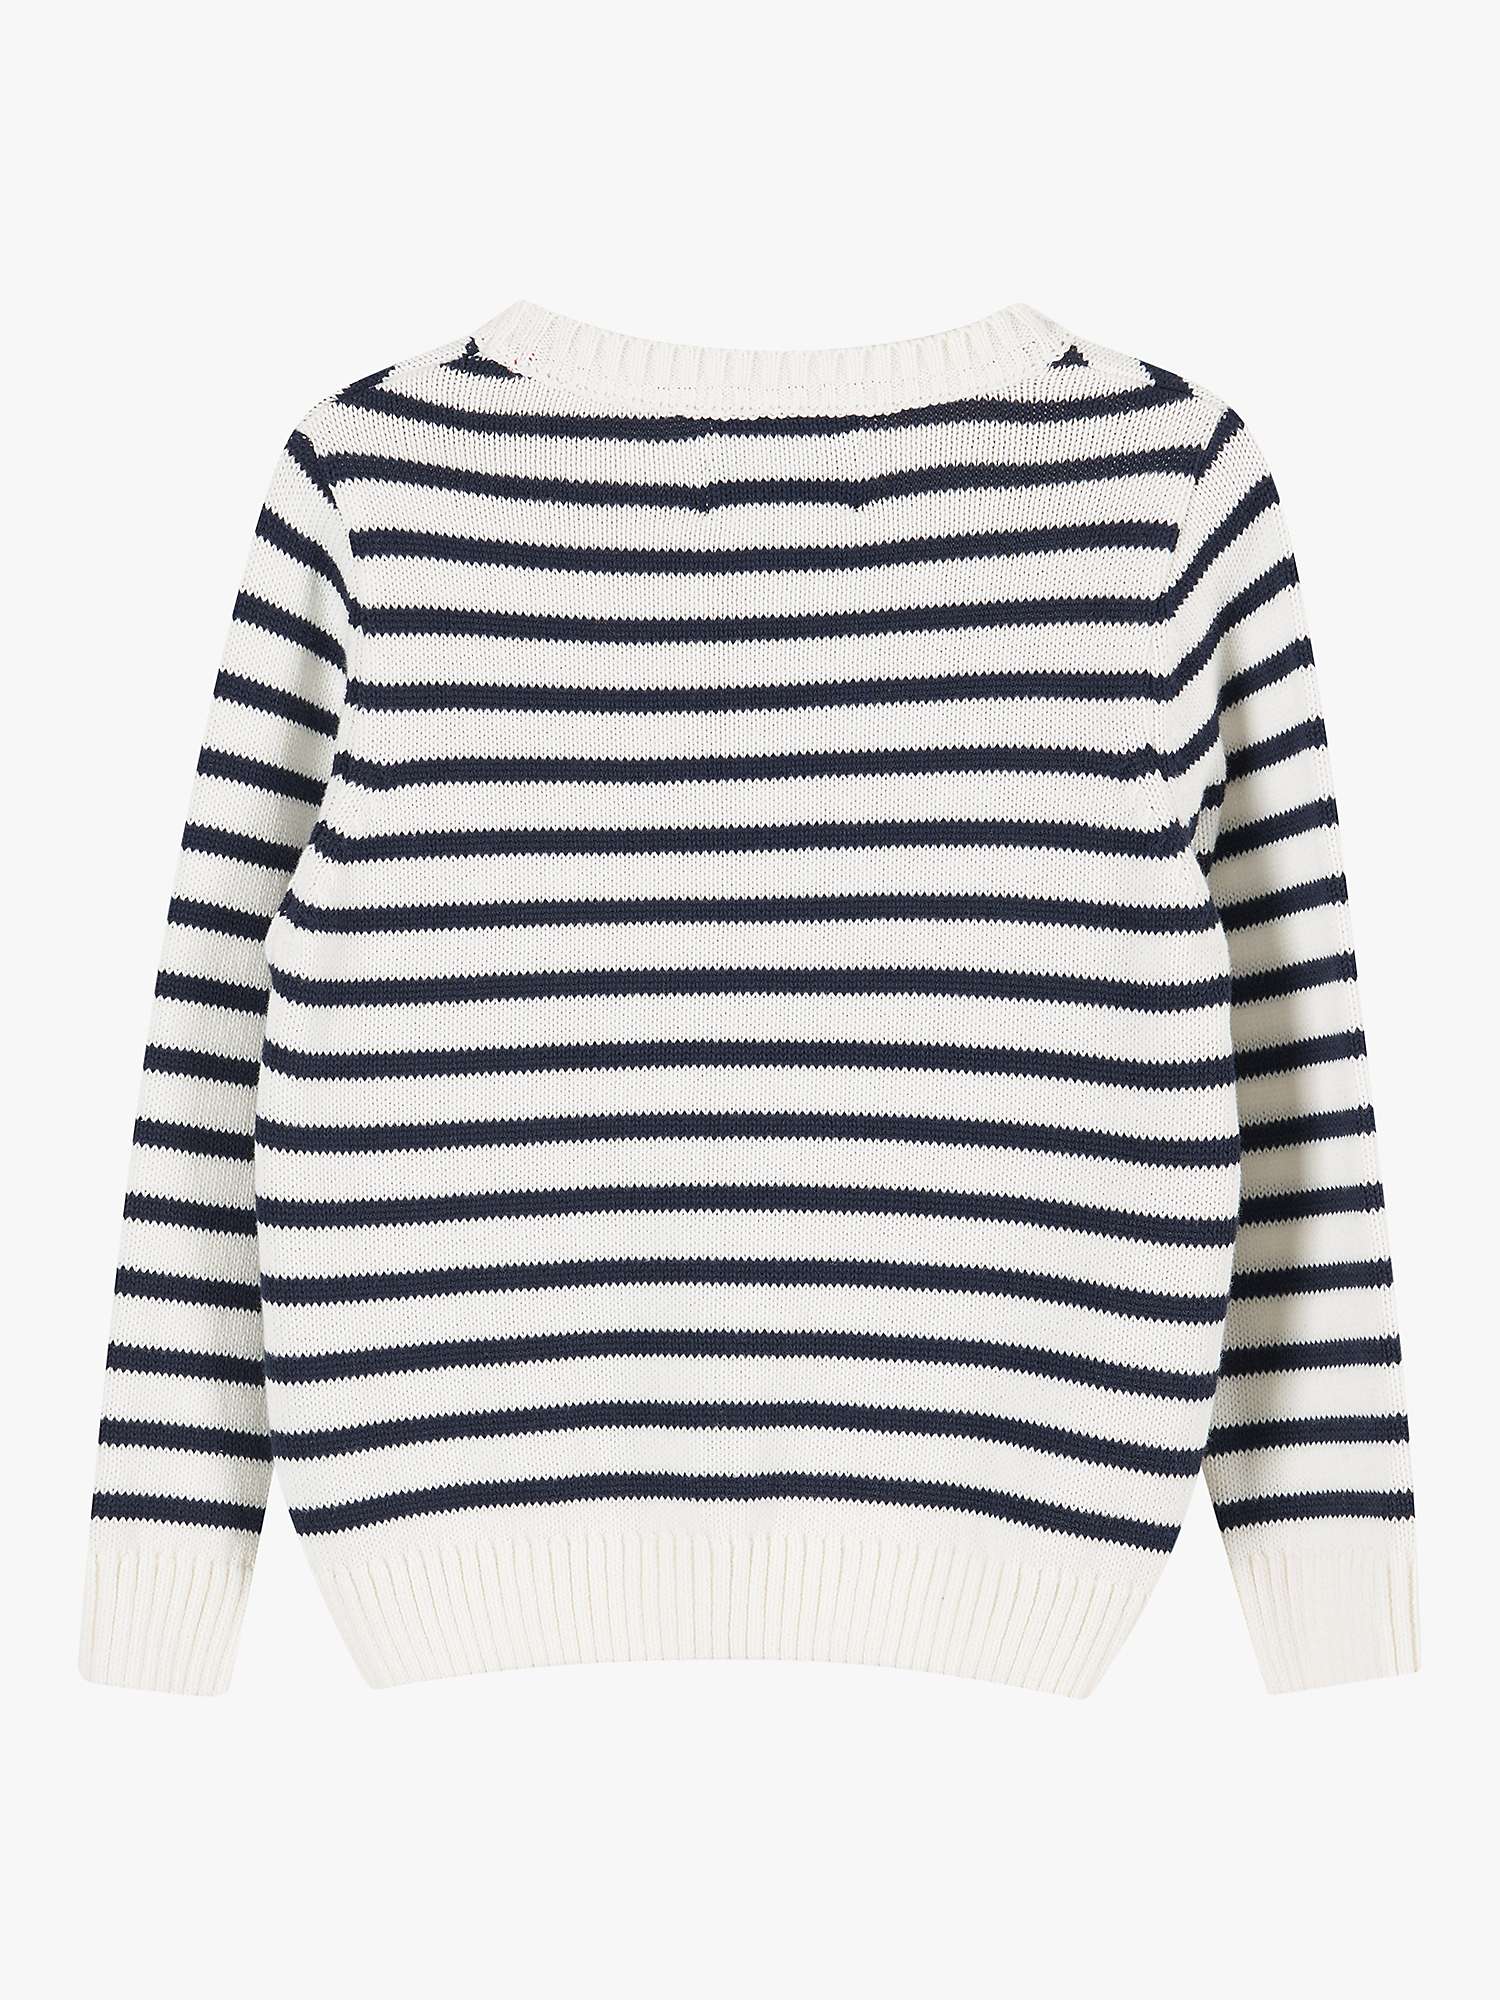 Buy Trotters Kids' Striped Anchor Jumper, Navy/White Online at johnlewis.com